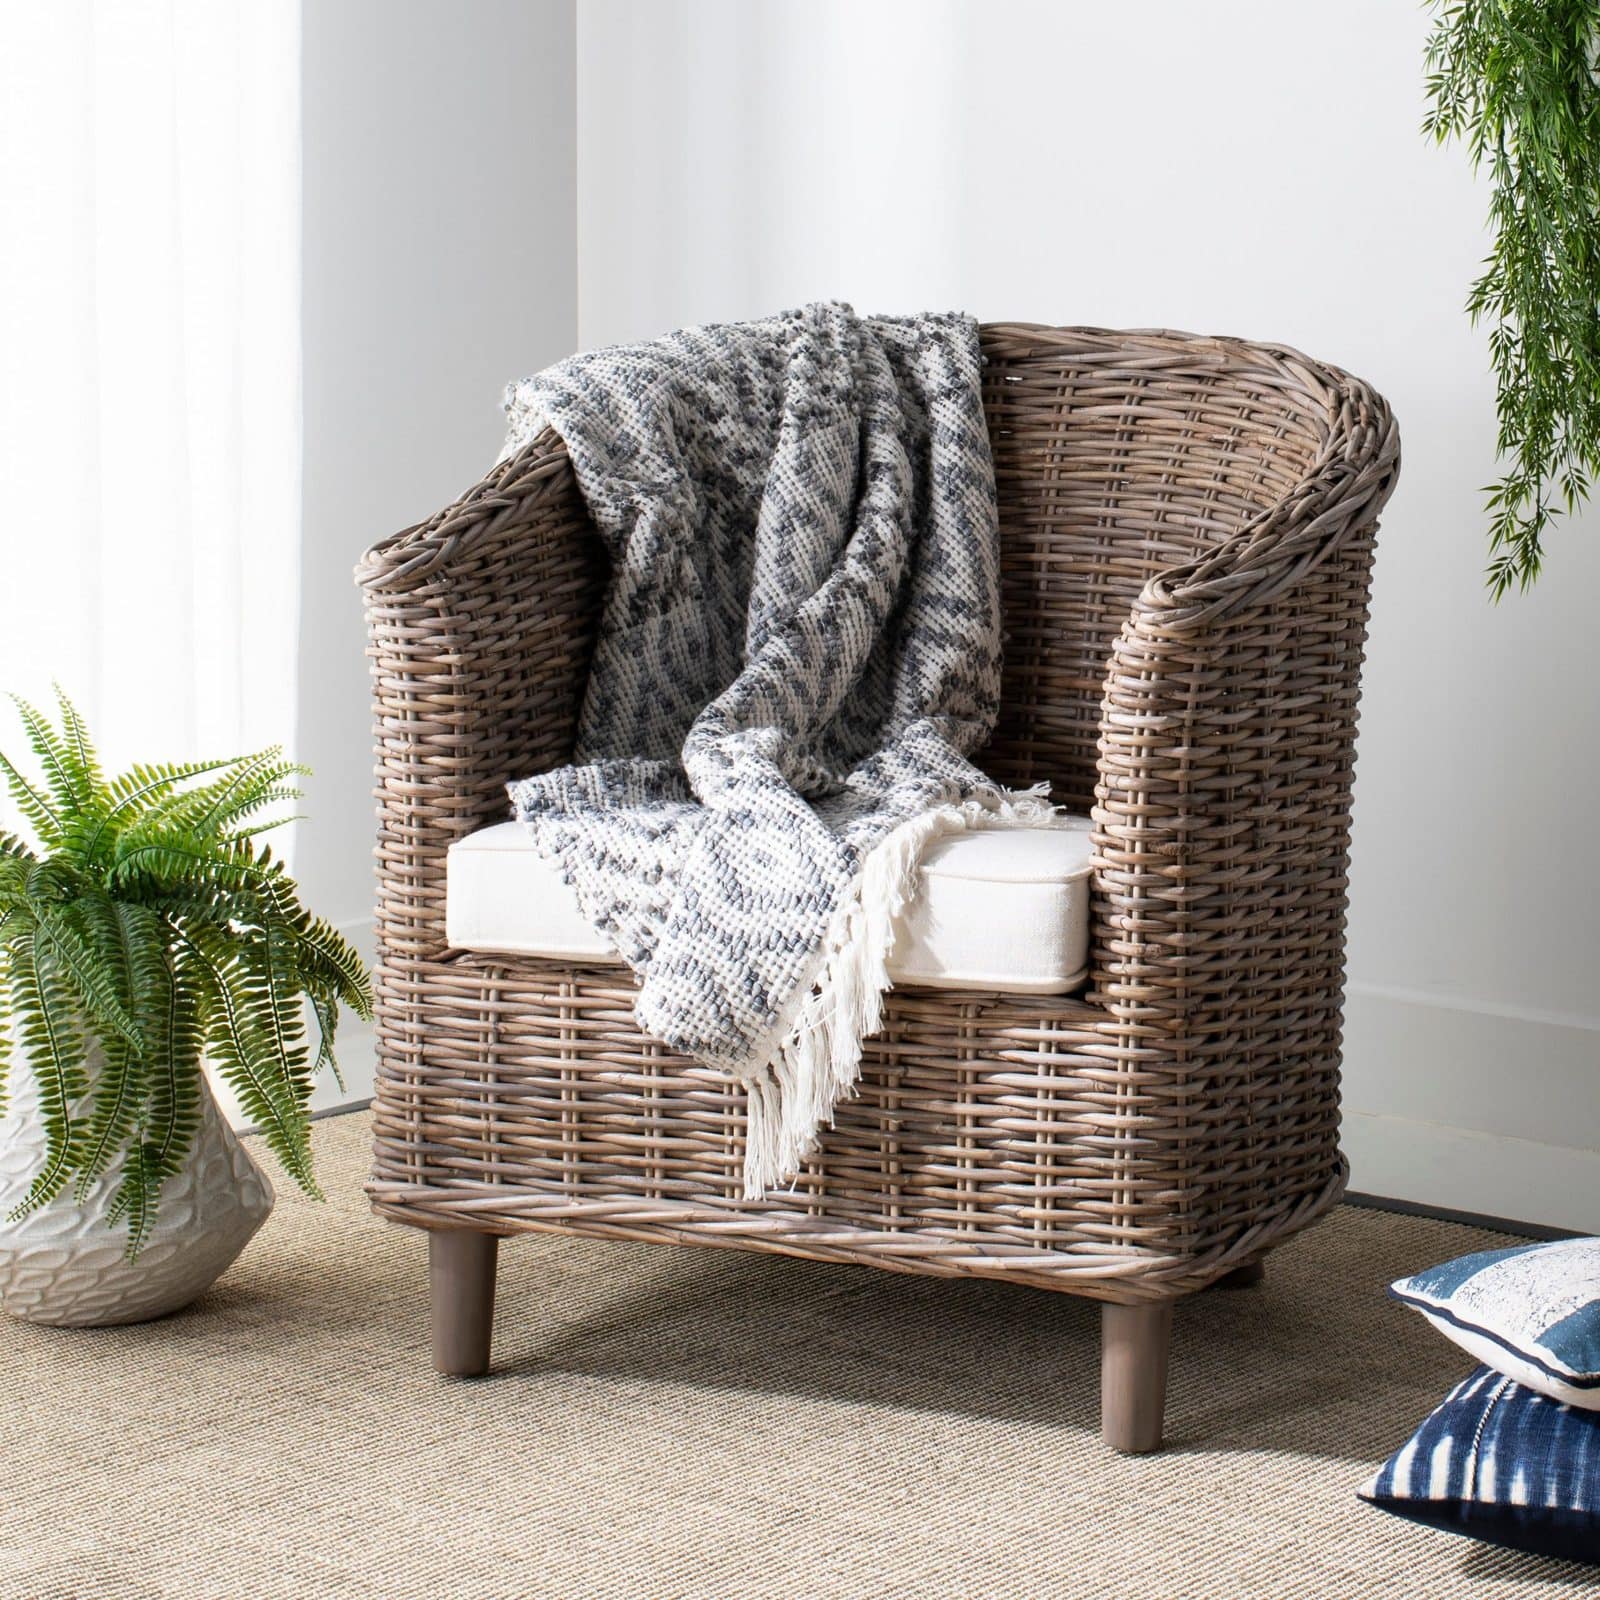 Bring Texture to Your Room with a Rattan Accent Chair